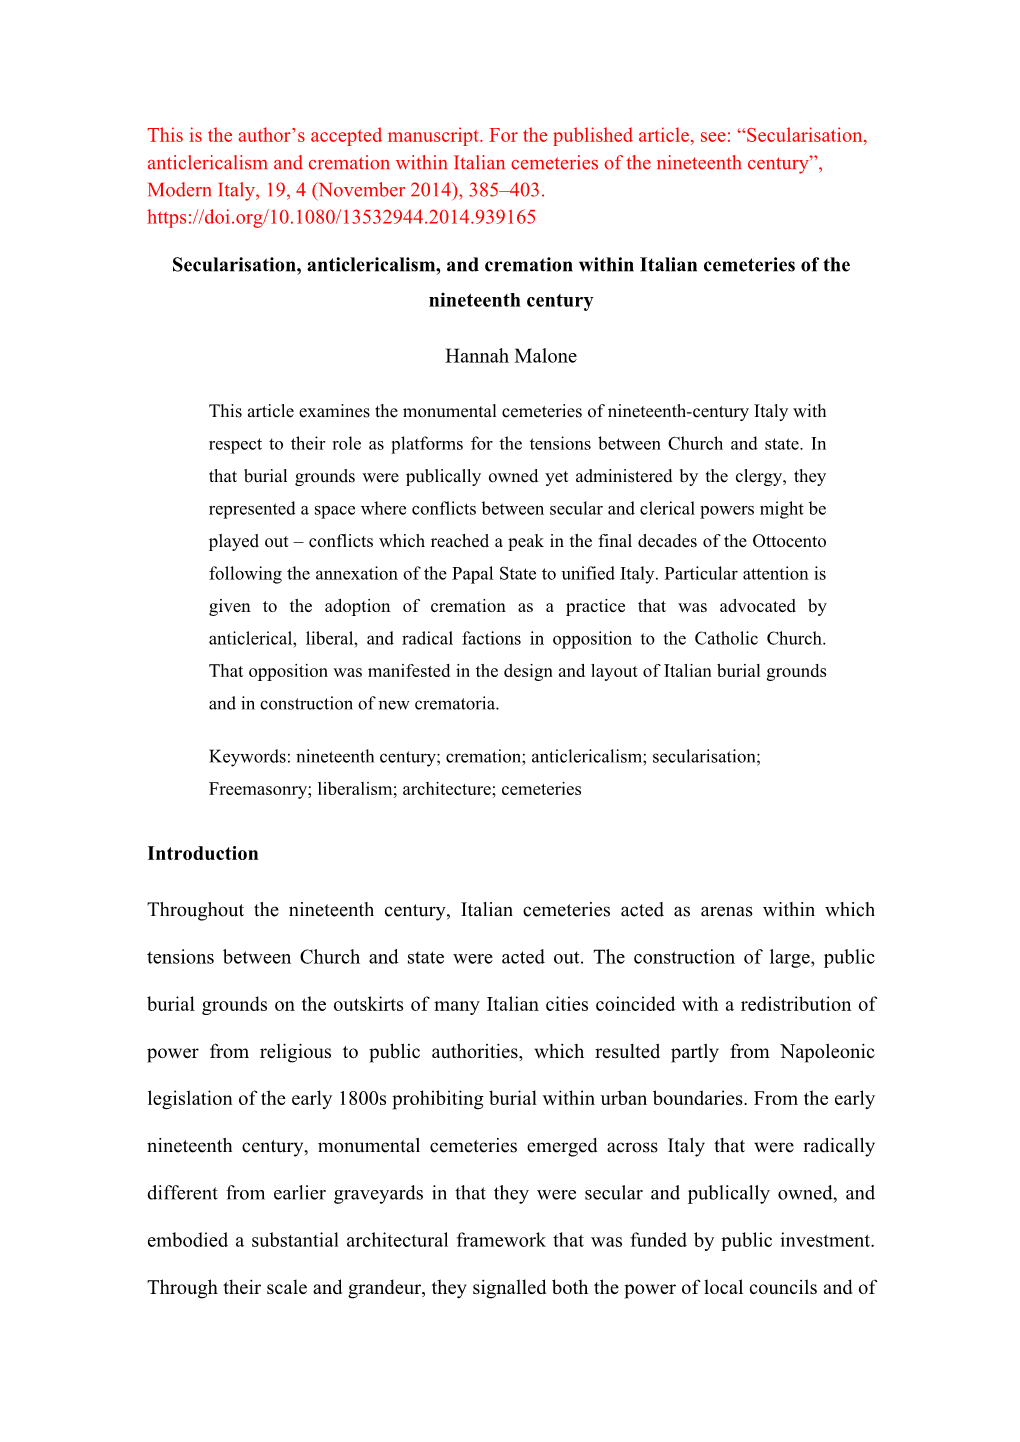 Secularisation, Anticlericalism and Cremation Within Italian Cemeteries of the Nineteenth Century”, Modern Italy, 19, 4 (November 2014), 385–403